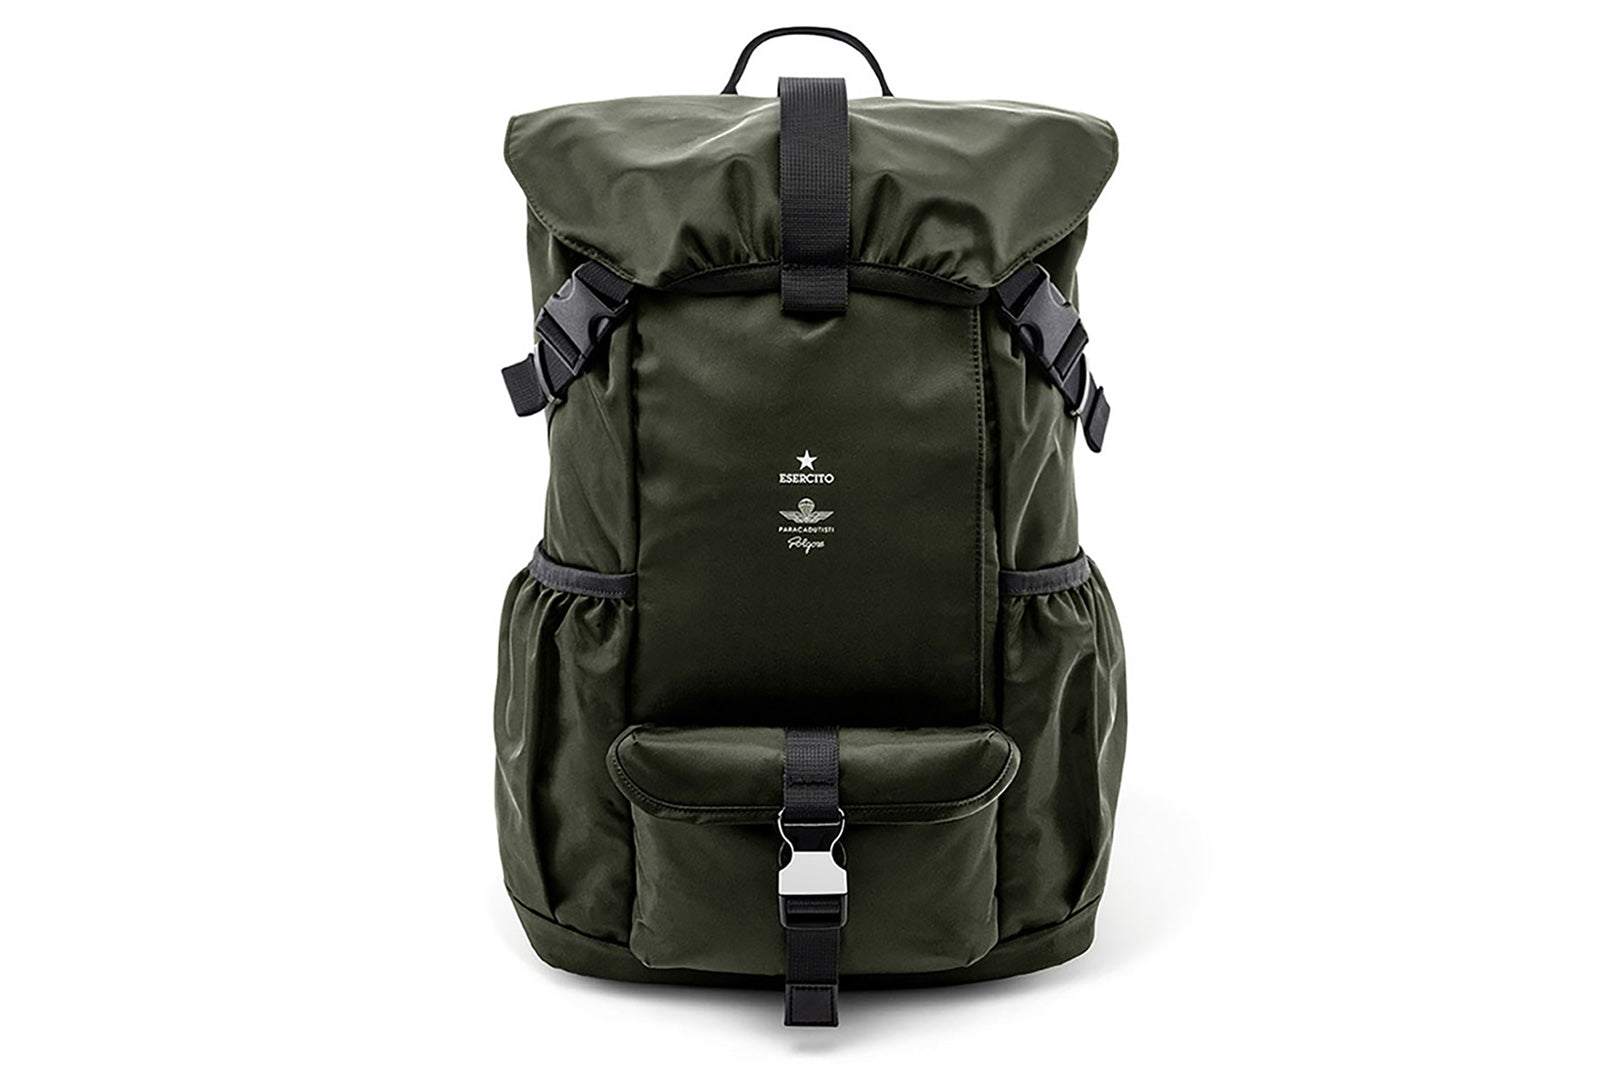 ESERCITO エセルチート G-FORCE HELI-BACKPACK バックパック リュック